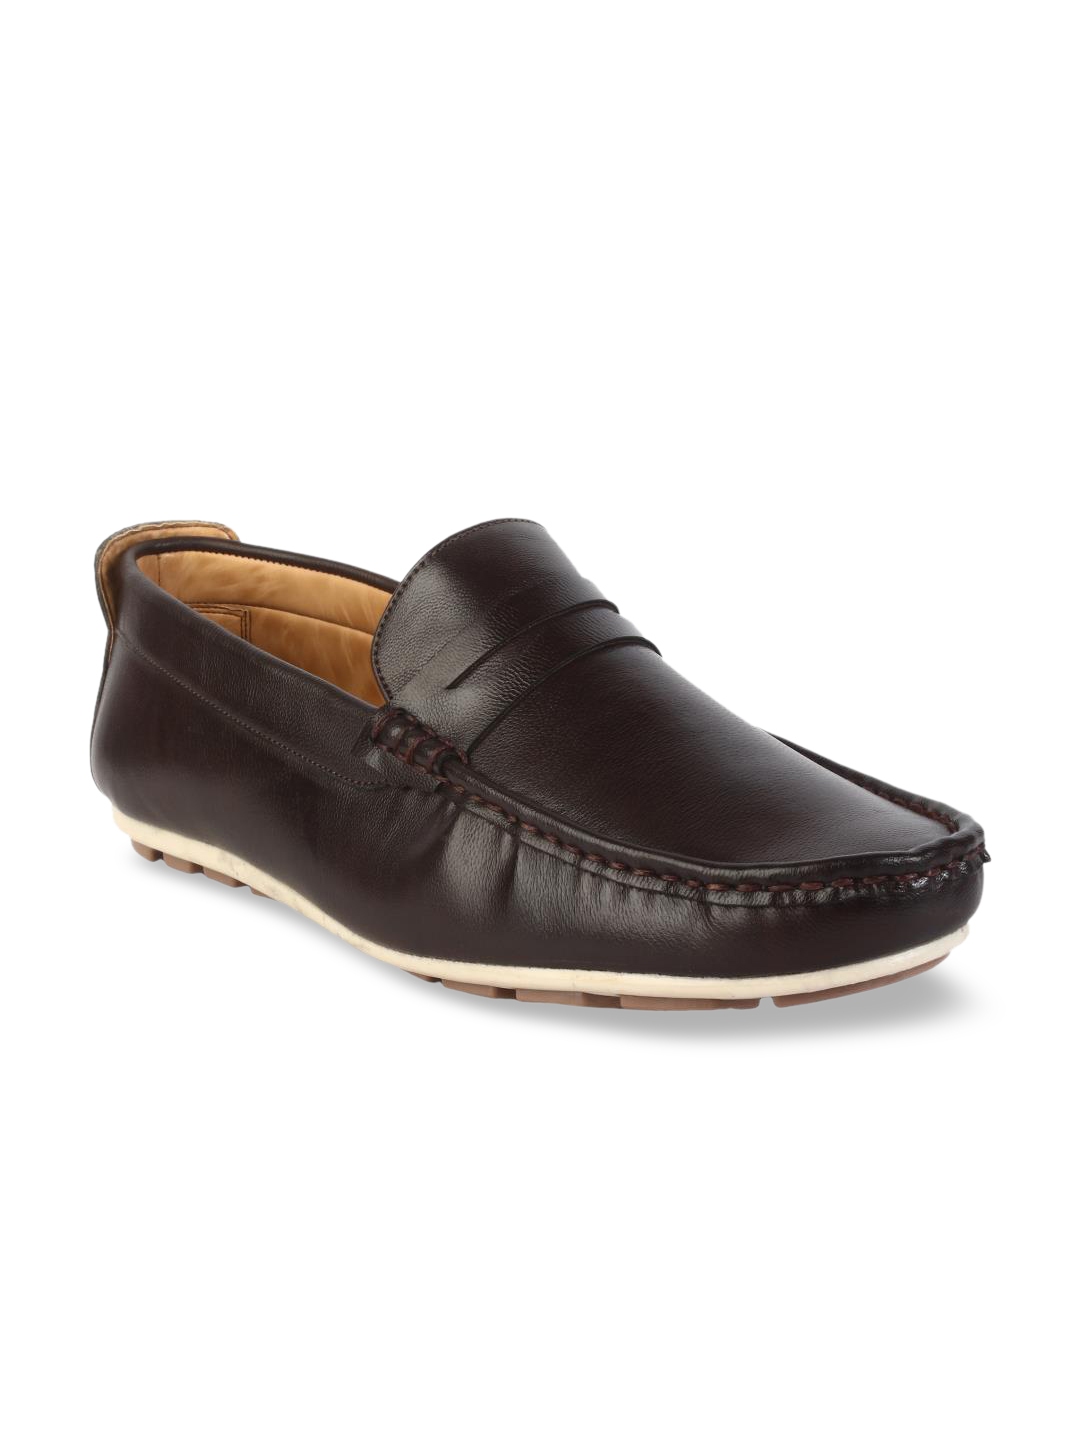 Buy Respiro Men Brown Loafers - Casual Shoes for Men 9438495 | Myntra